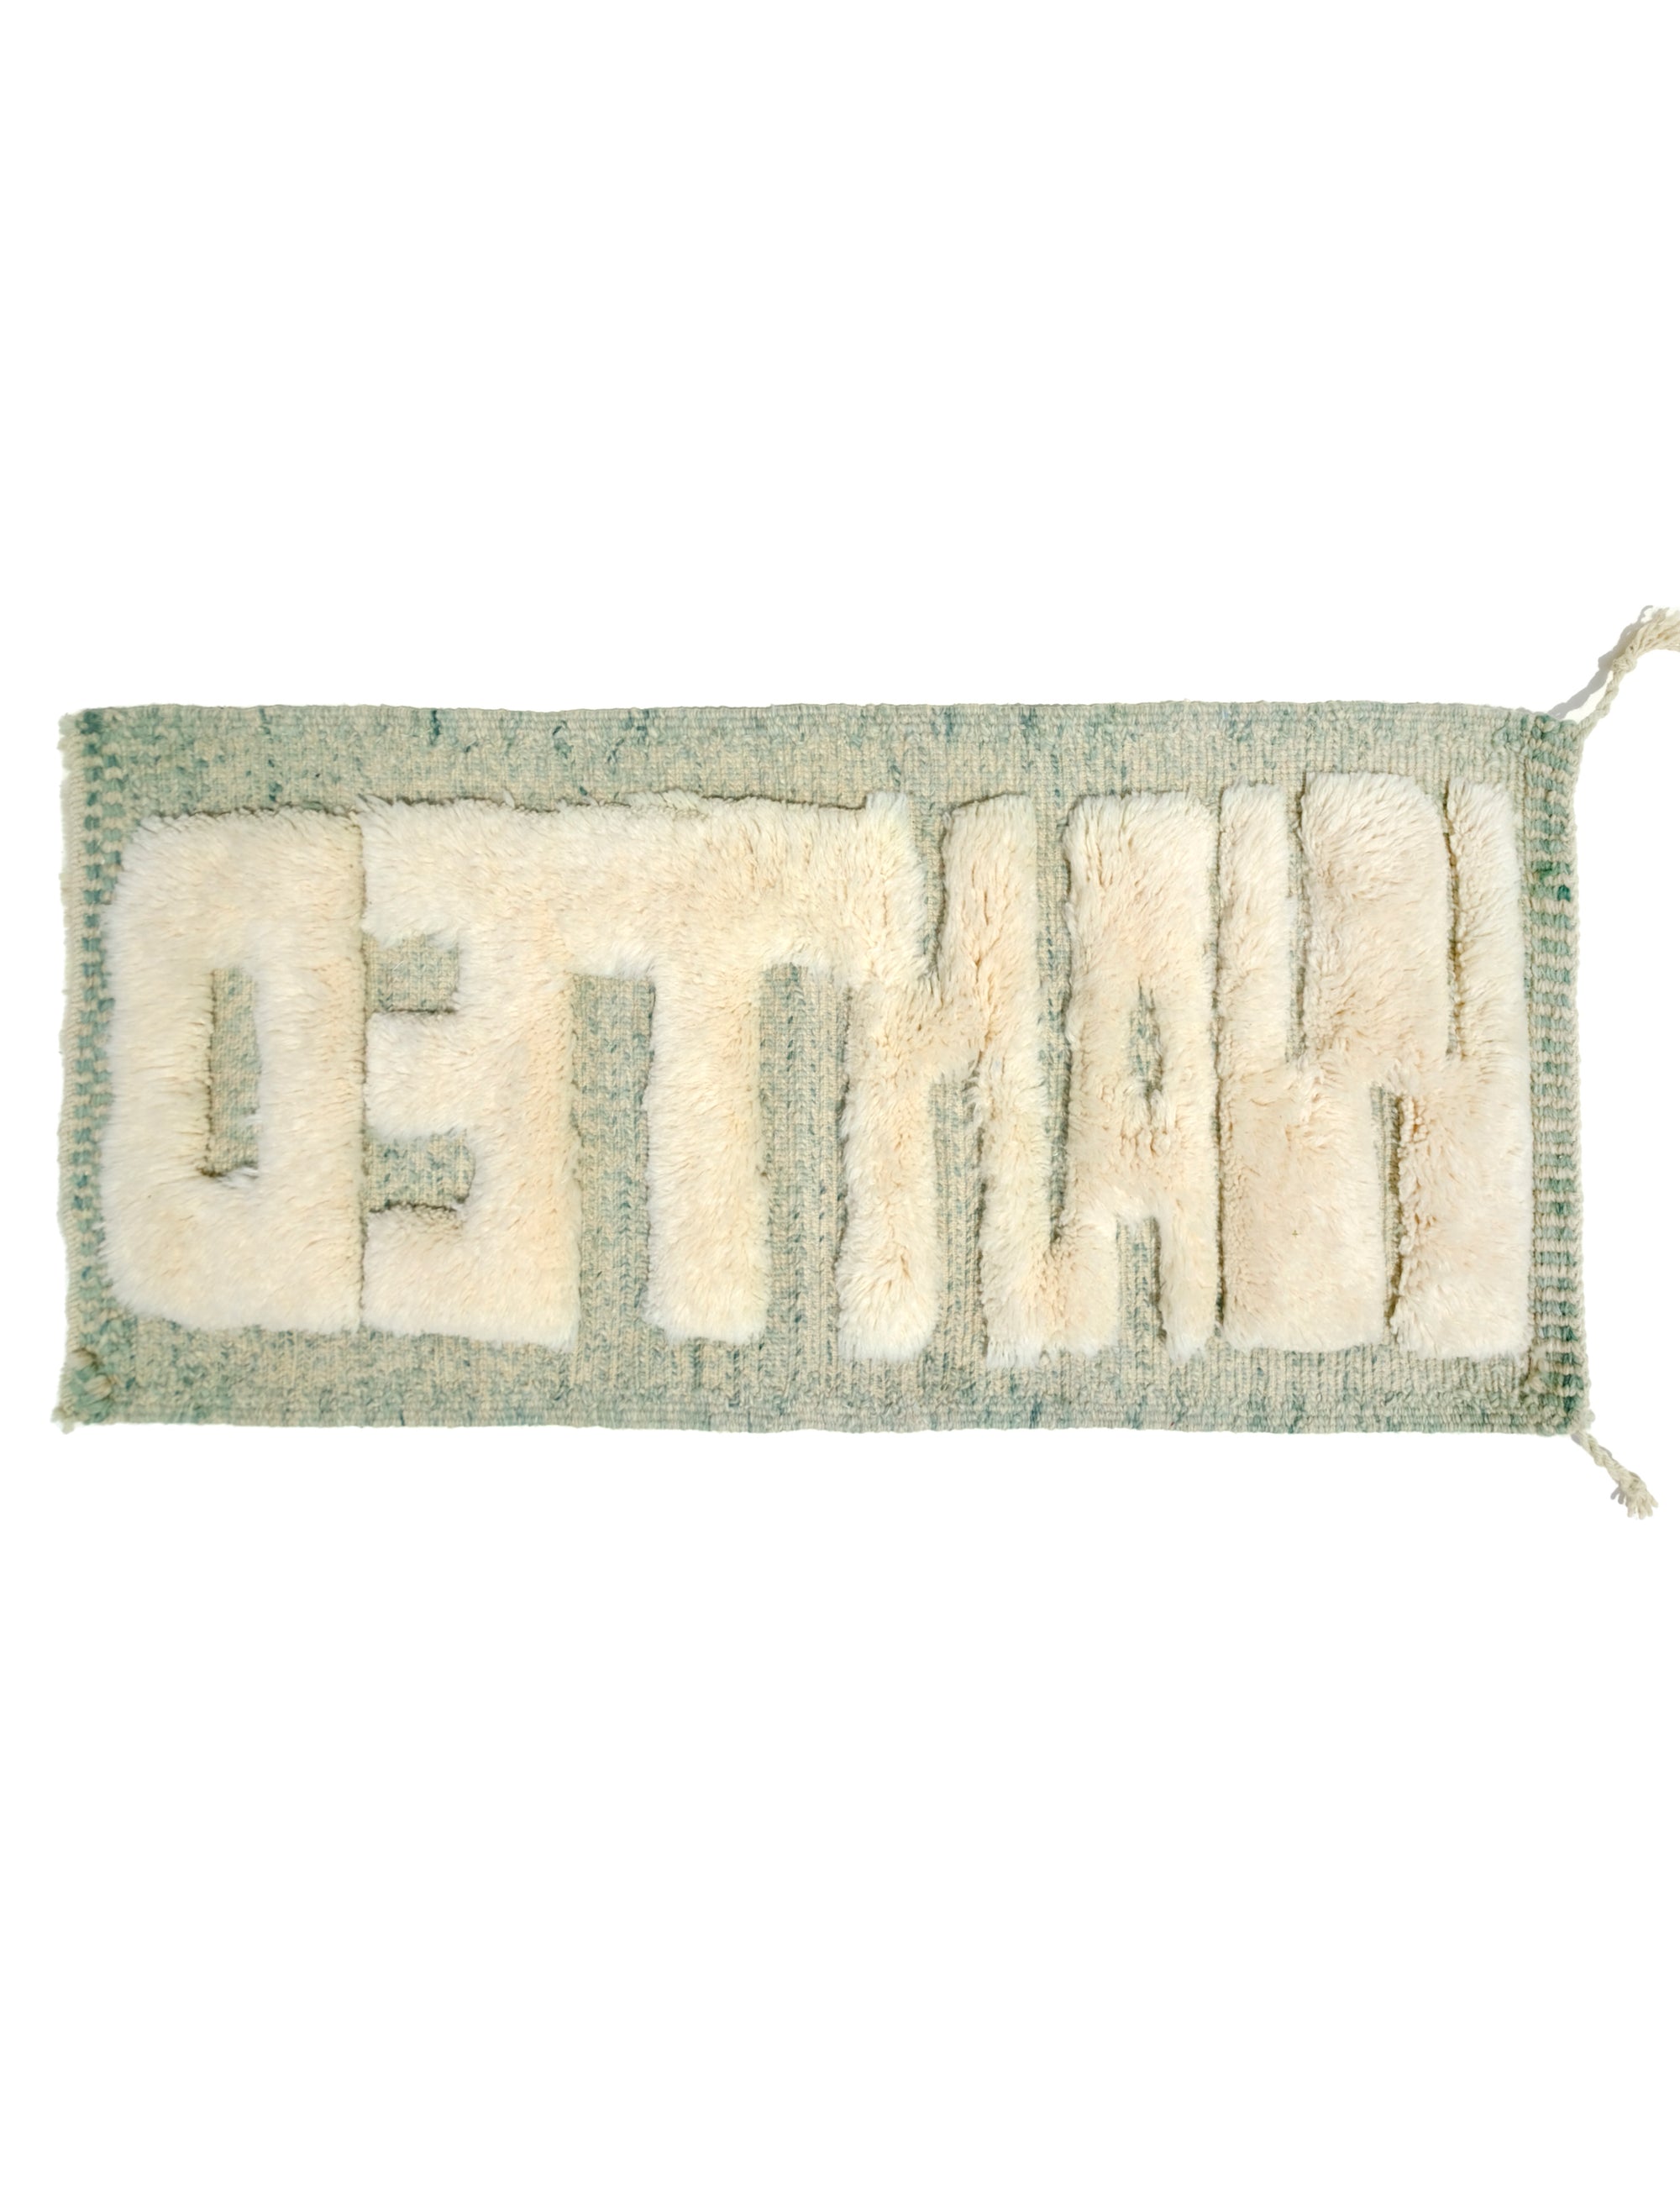 Discover the Reversible Ivory Green Whispers Rug, a truly unique and versatile piece handmade by Berber women in the Atlas Mountains. With its fuzzy 'WANTED' lettering on one side and a calming mix of pale green shades on the other, this rug adds an elegant touch to your decor while spreading a positive message. Explore the beauty of reversible design in this exceptional handmade creation.